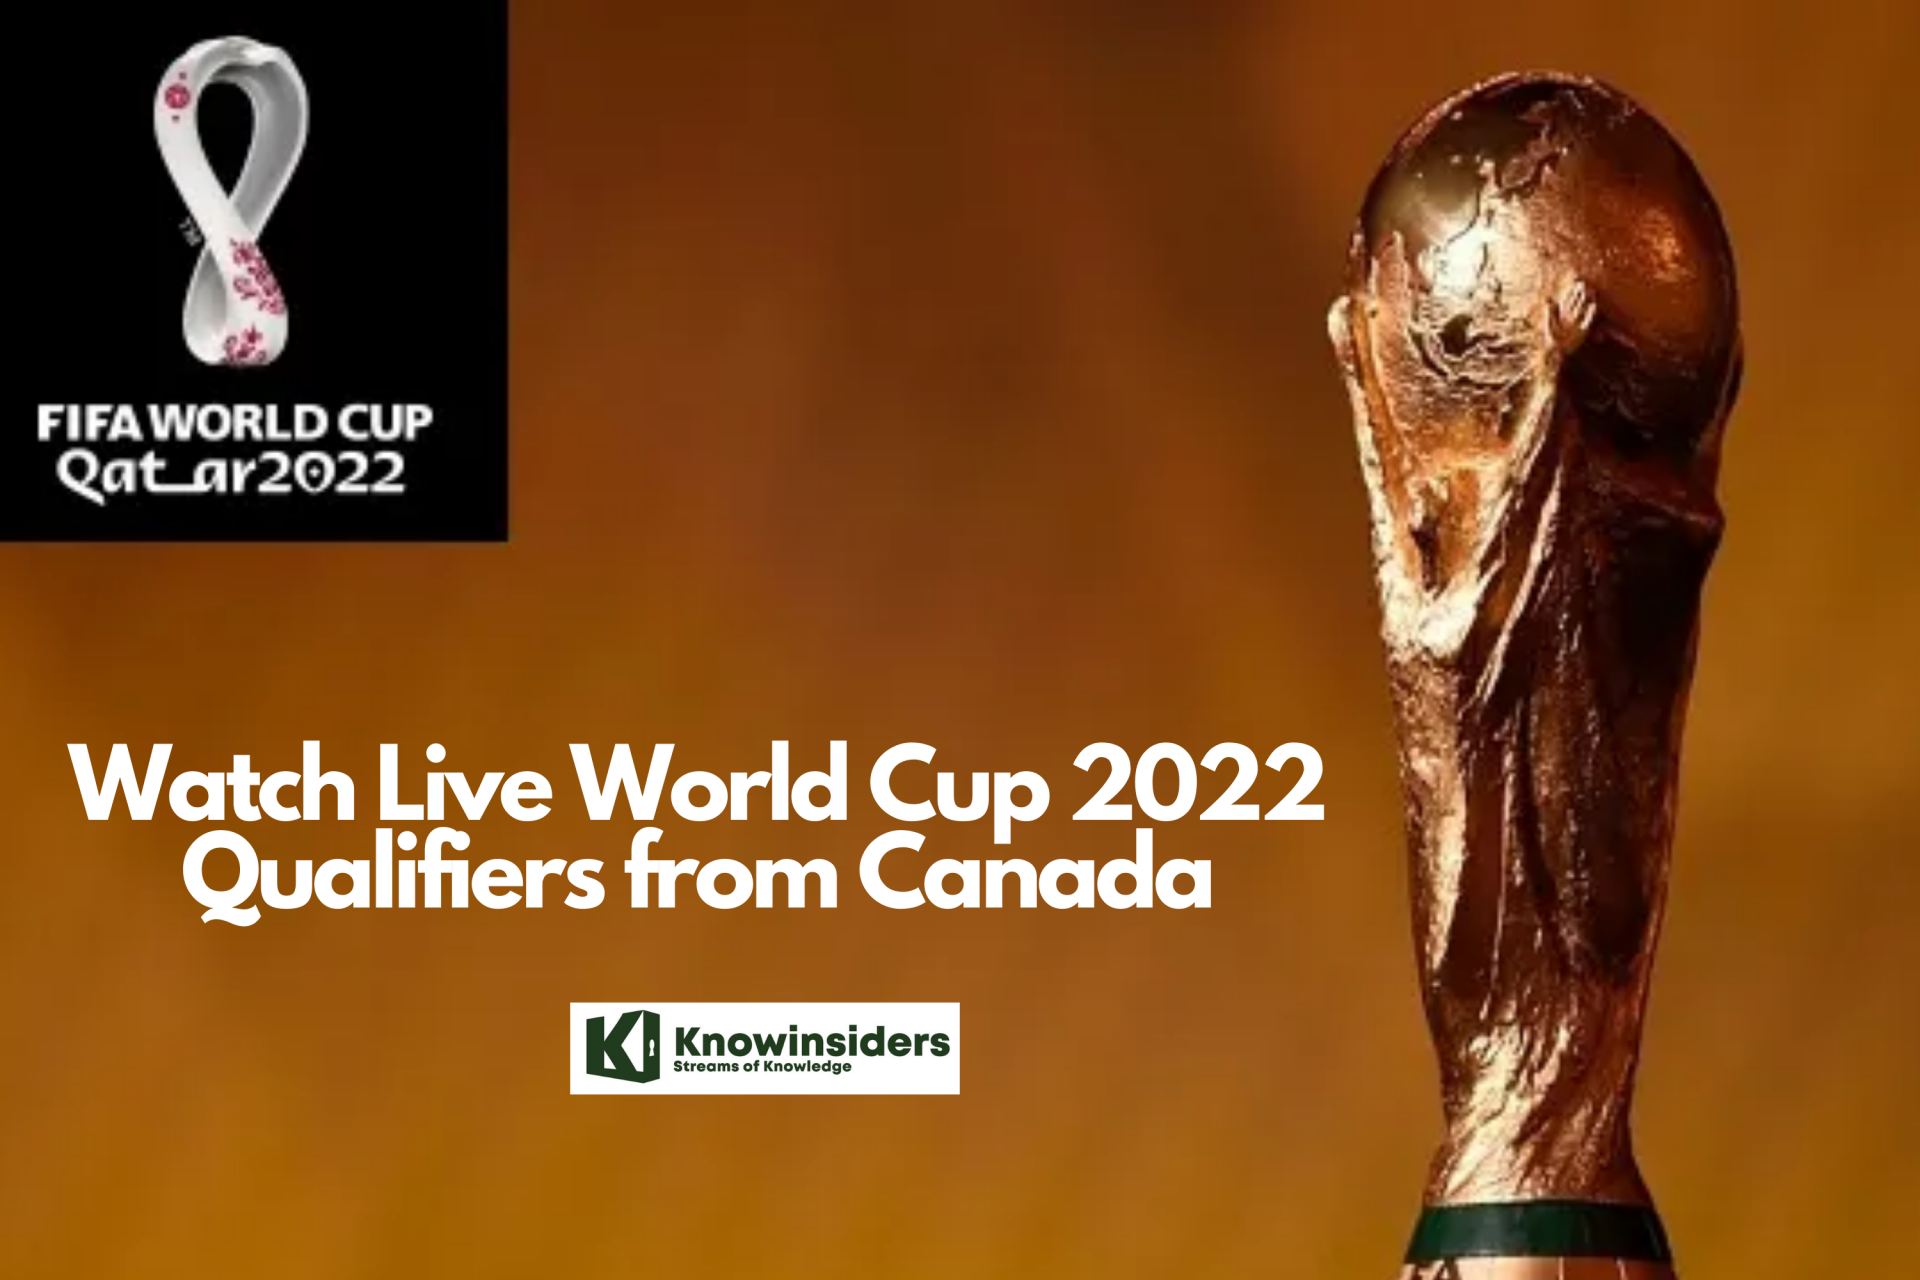 Watch Live World Cup 2022 Qualifiers from Canada